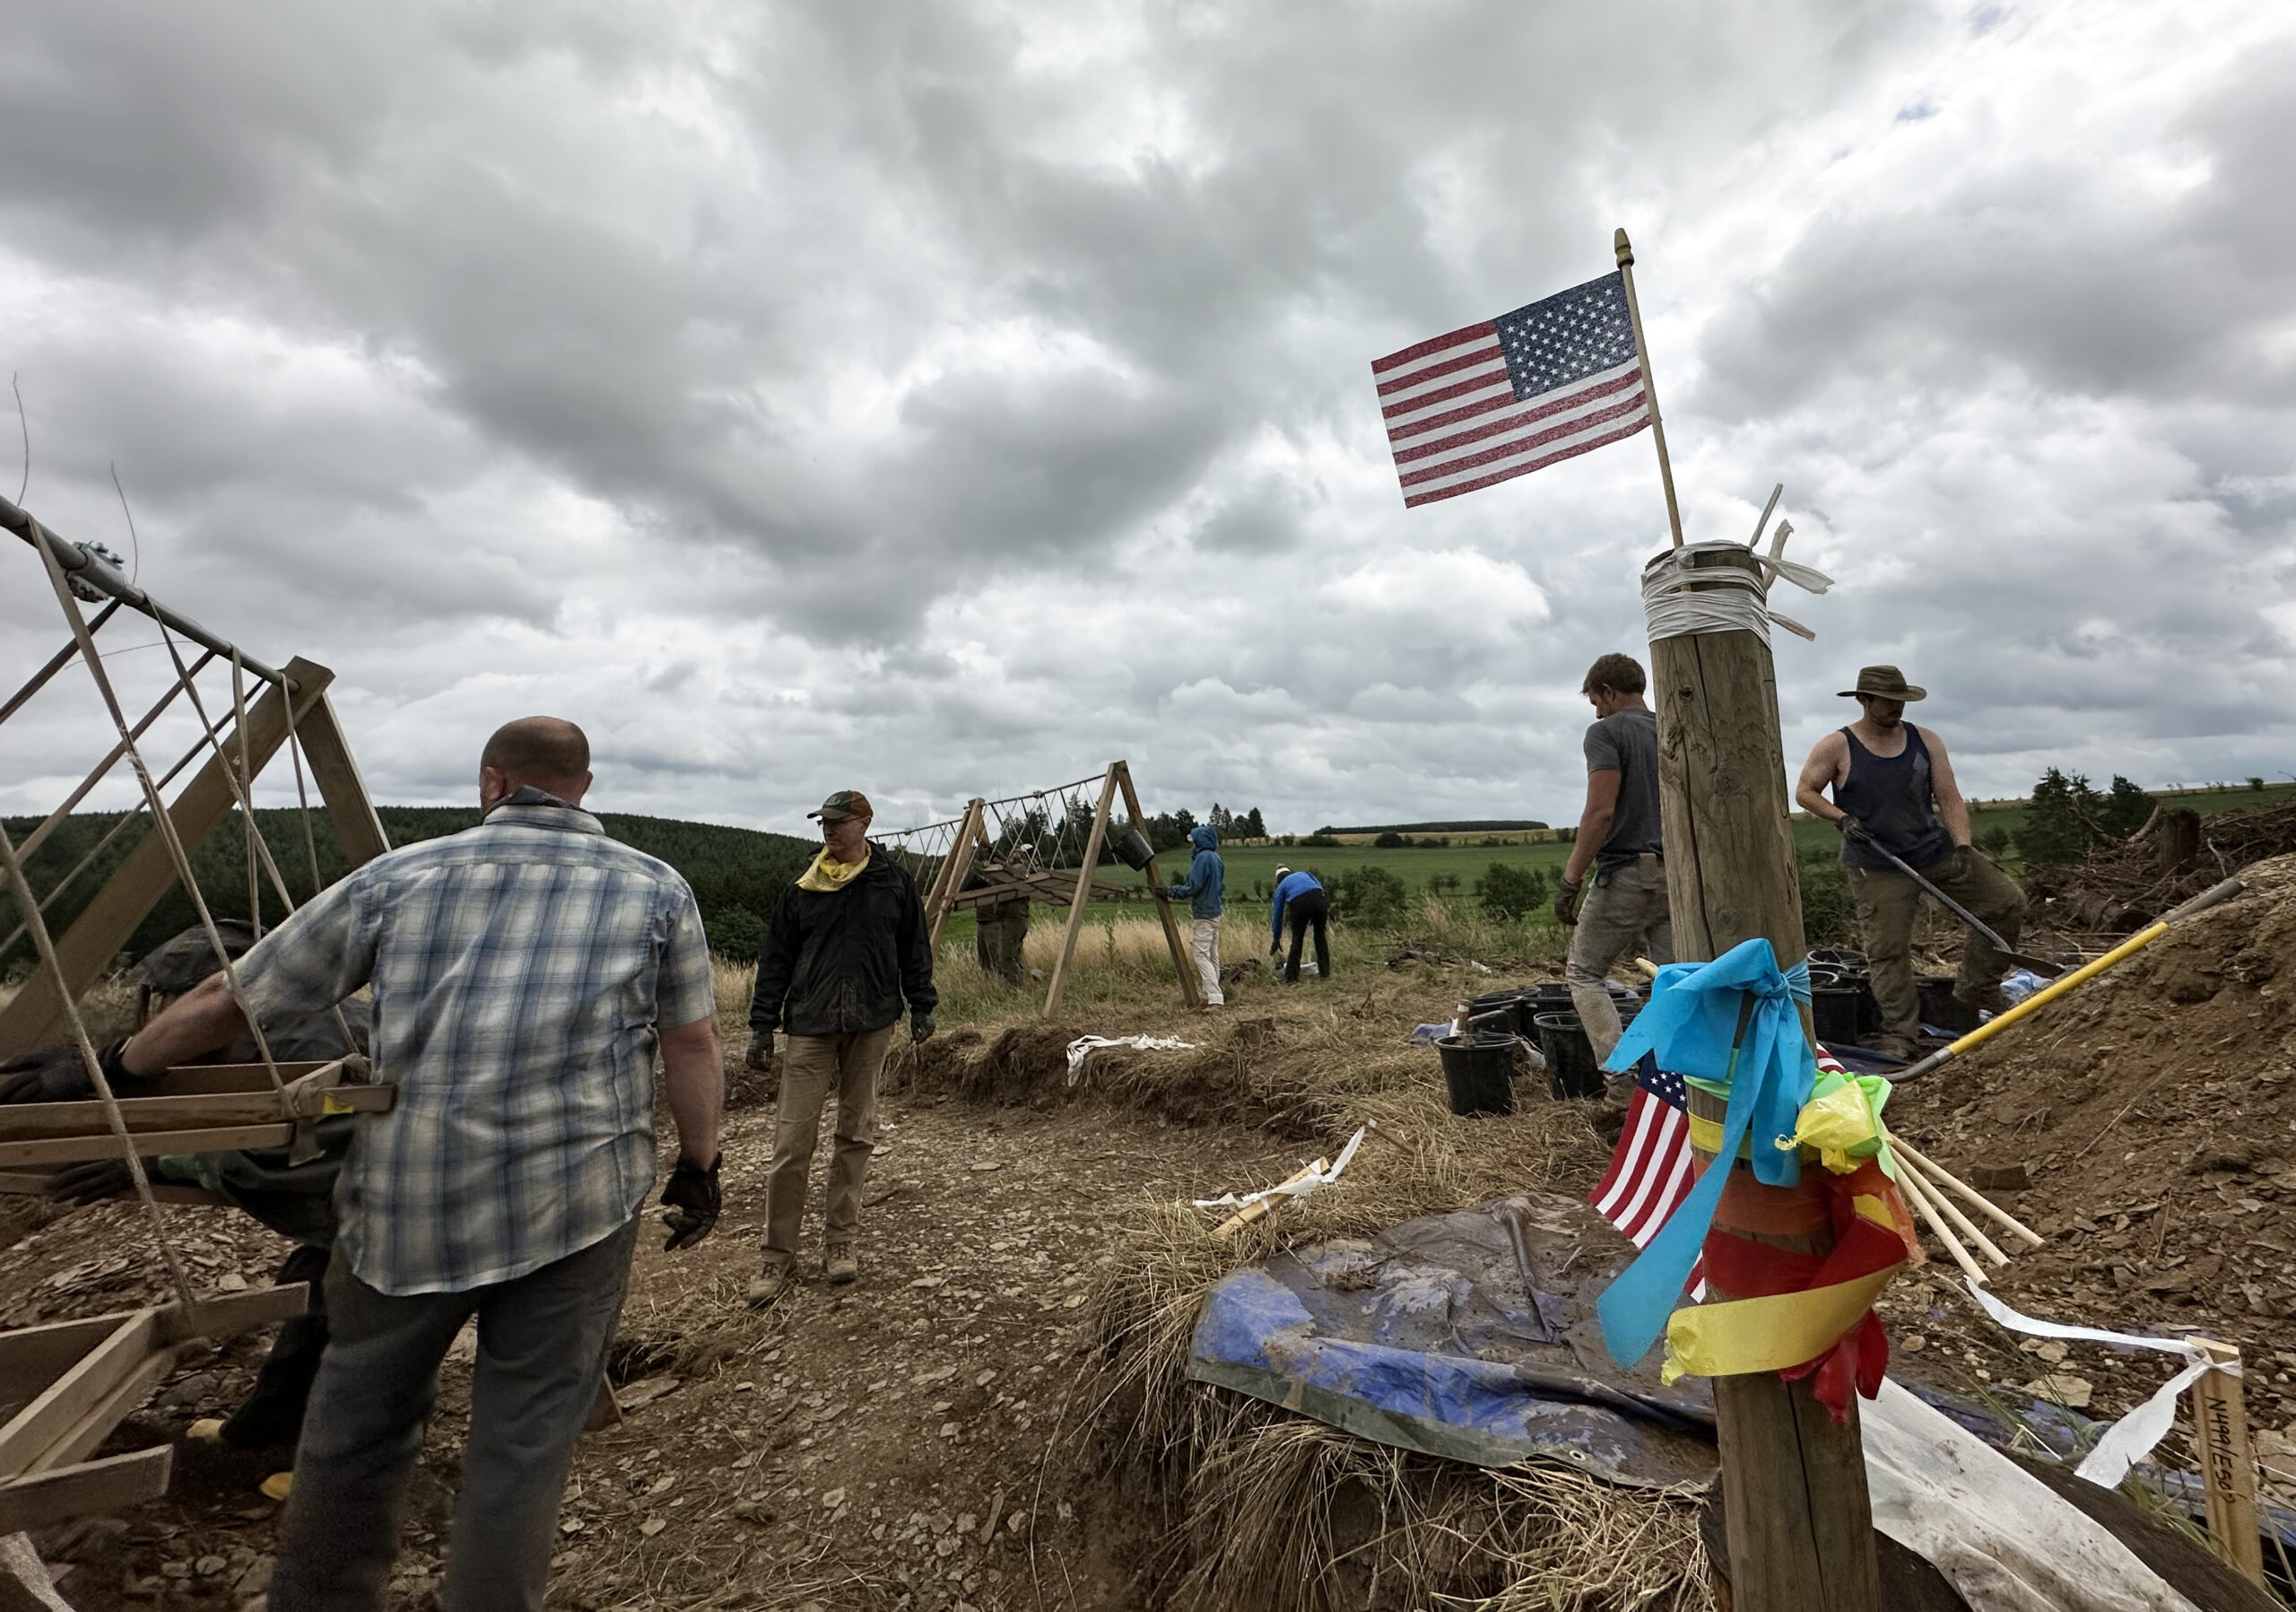 The UW-Madison MIA RIP team works to recover the remains of an American service member in Belgium during the summer of 2023. The team displayed American flags for the July 4 holiday.